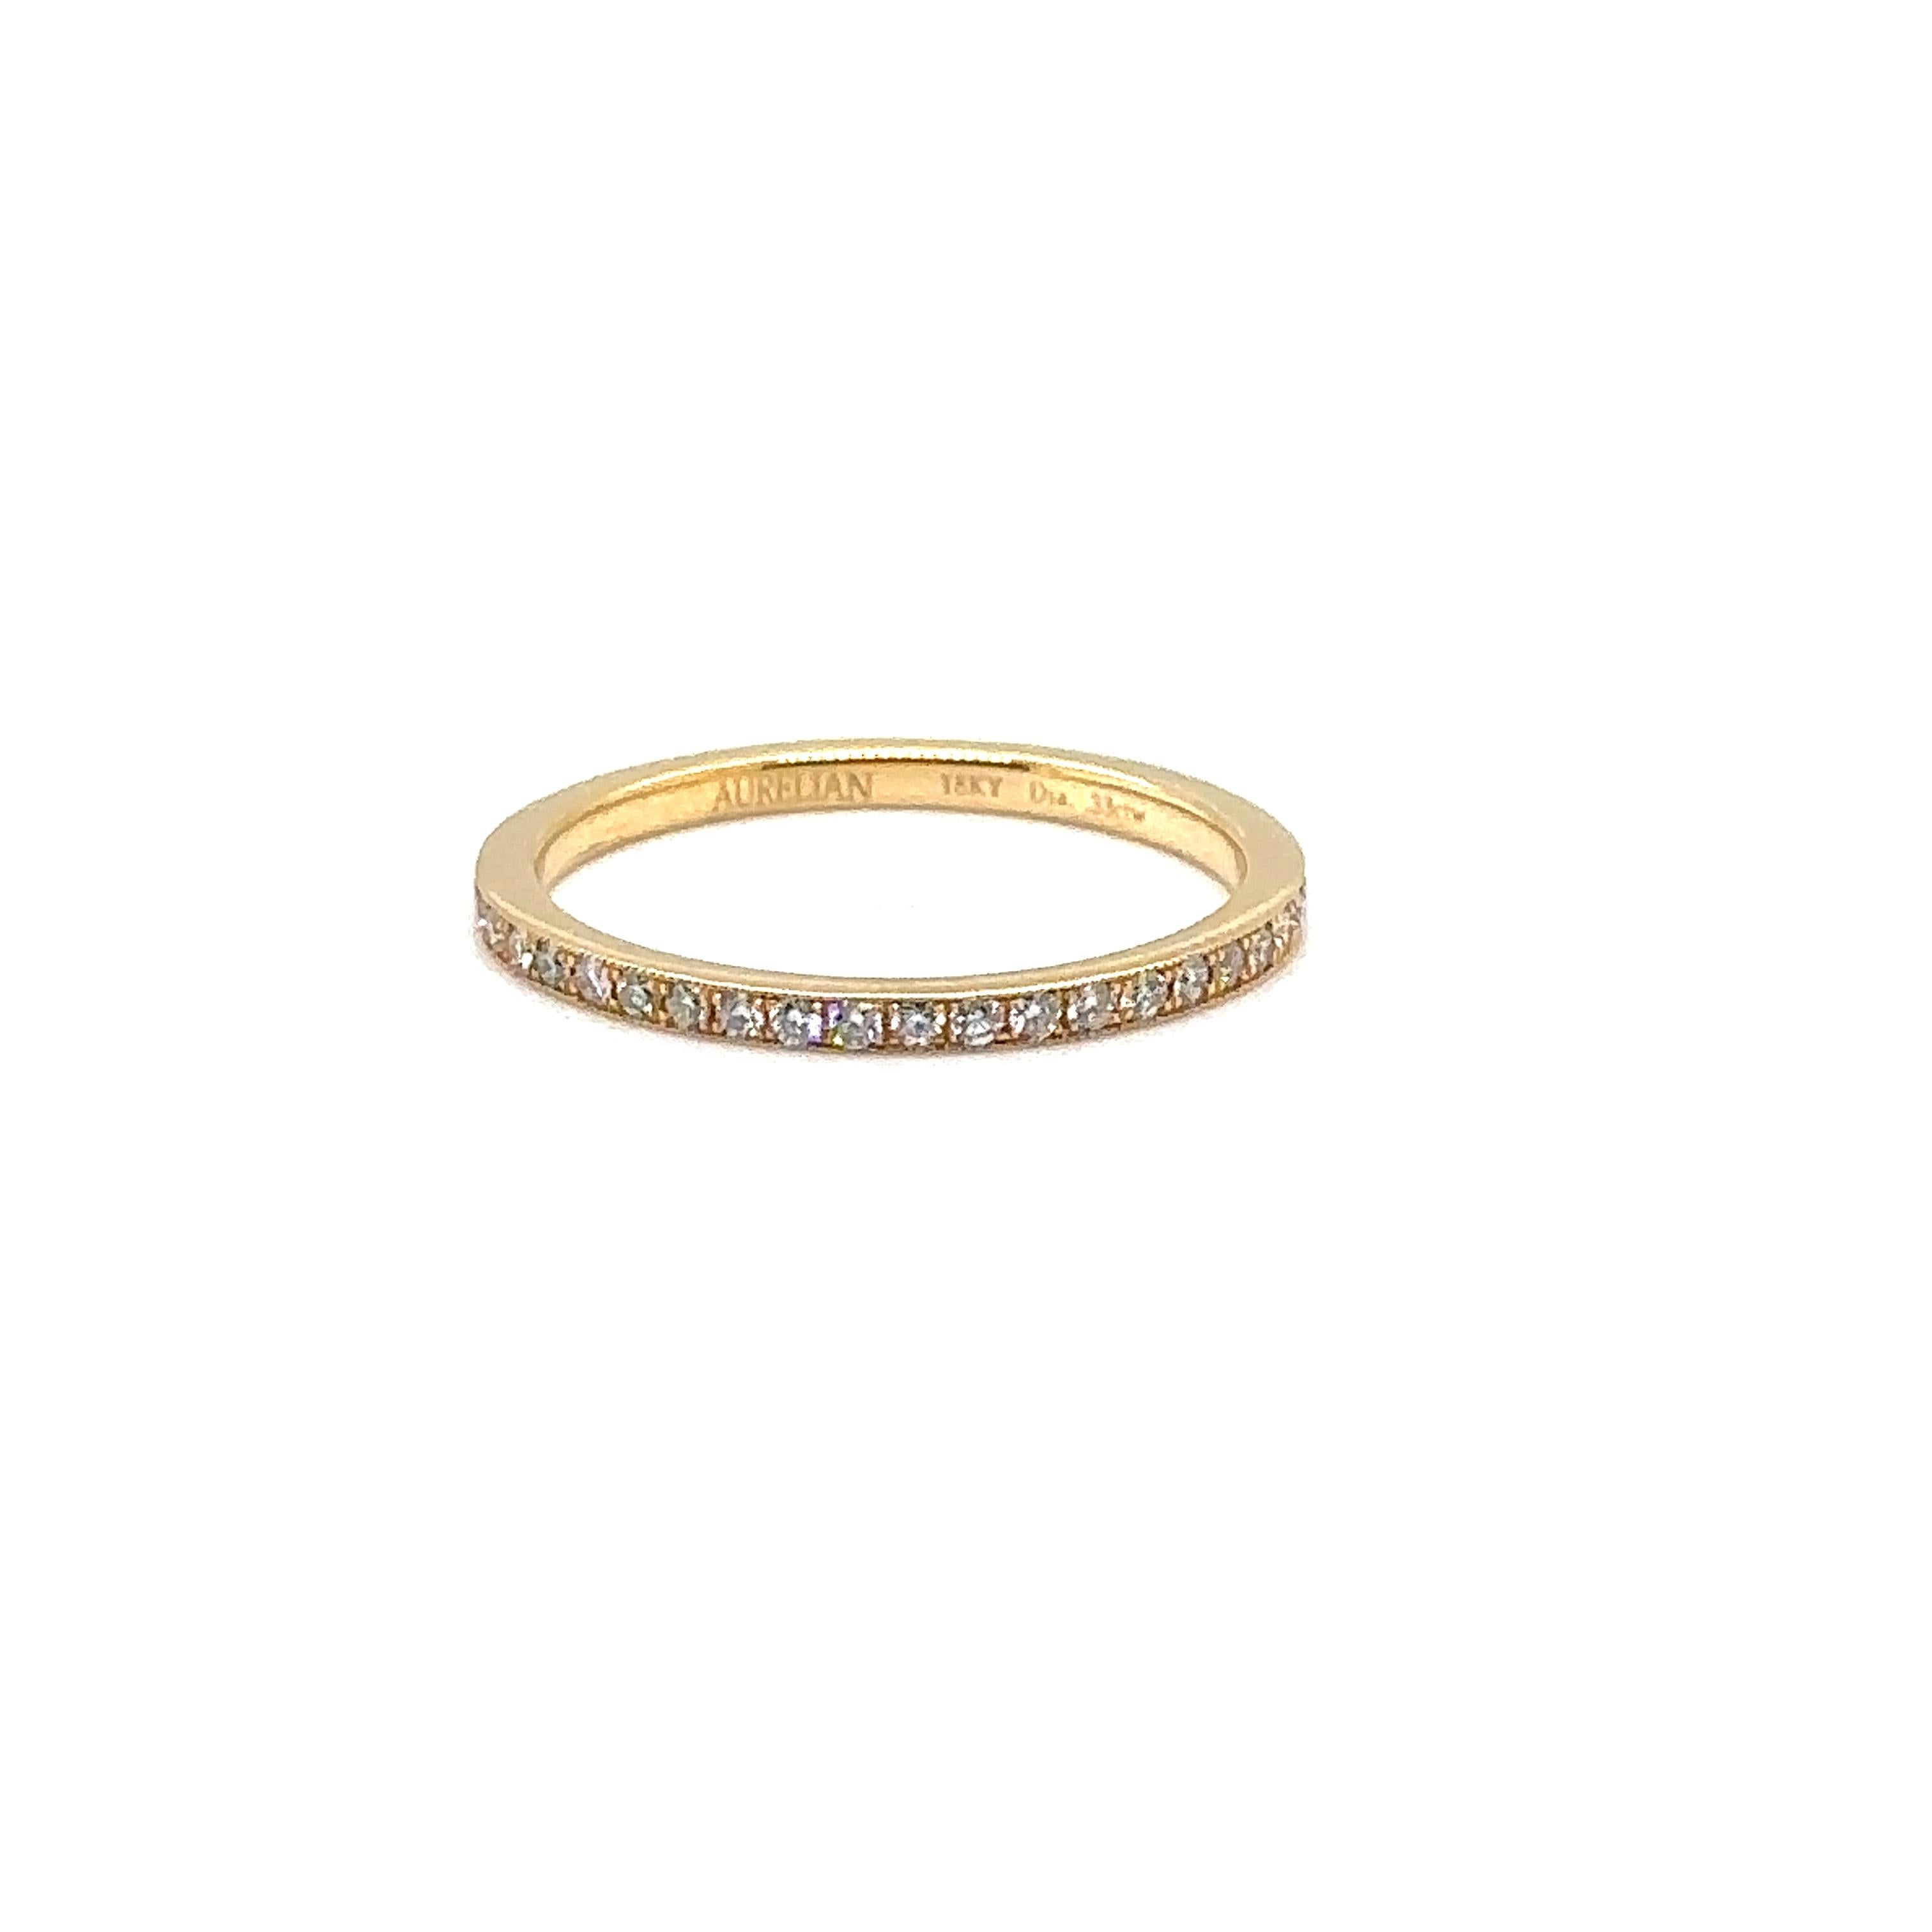 Modern WB-1.7-43 - 18K YELLOW GOLD WEDDING BAND with DIAMONDS For Sale